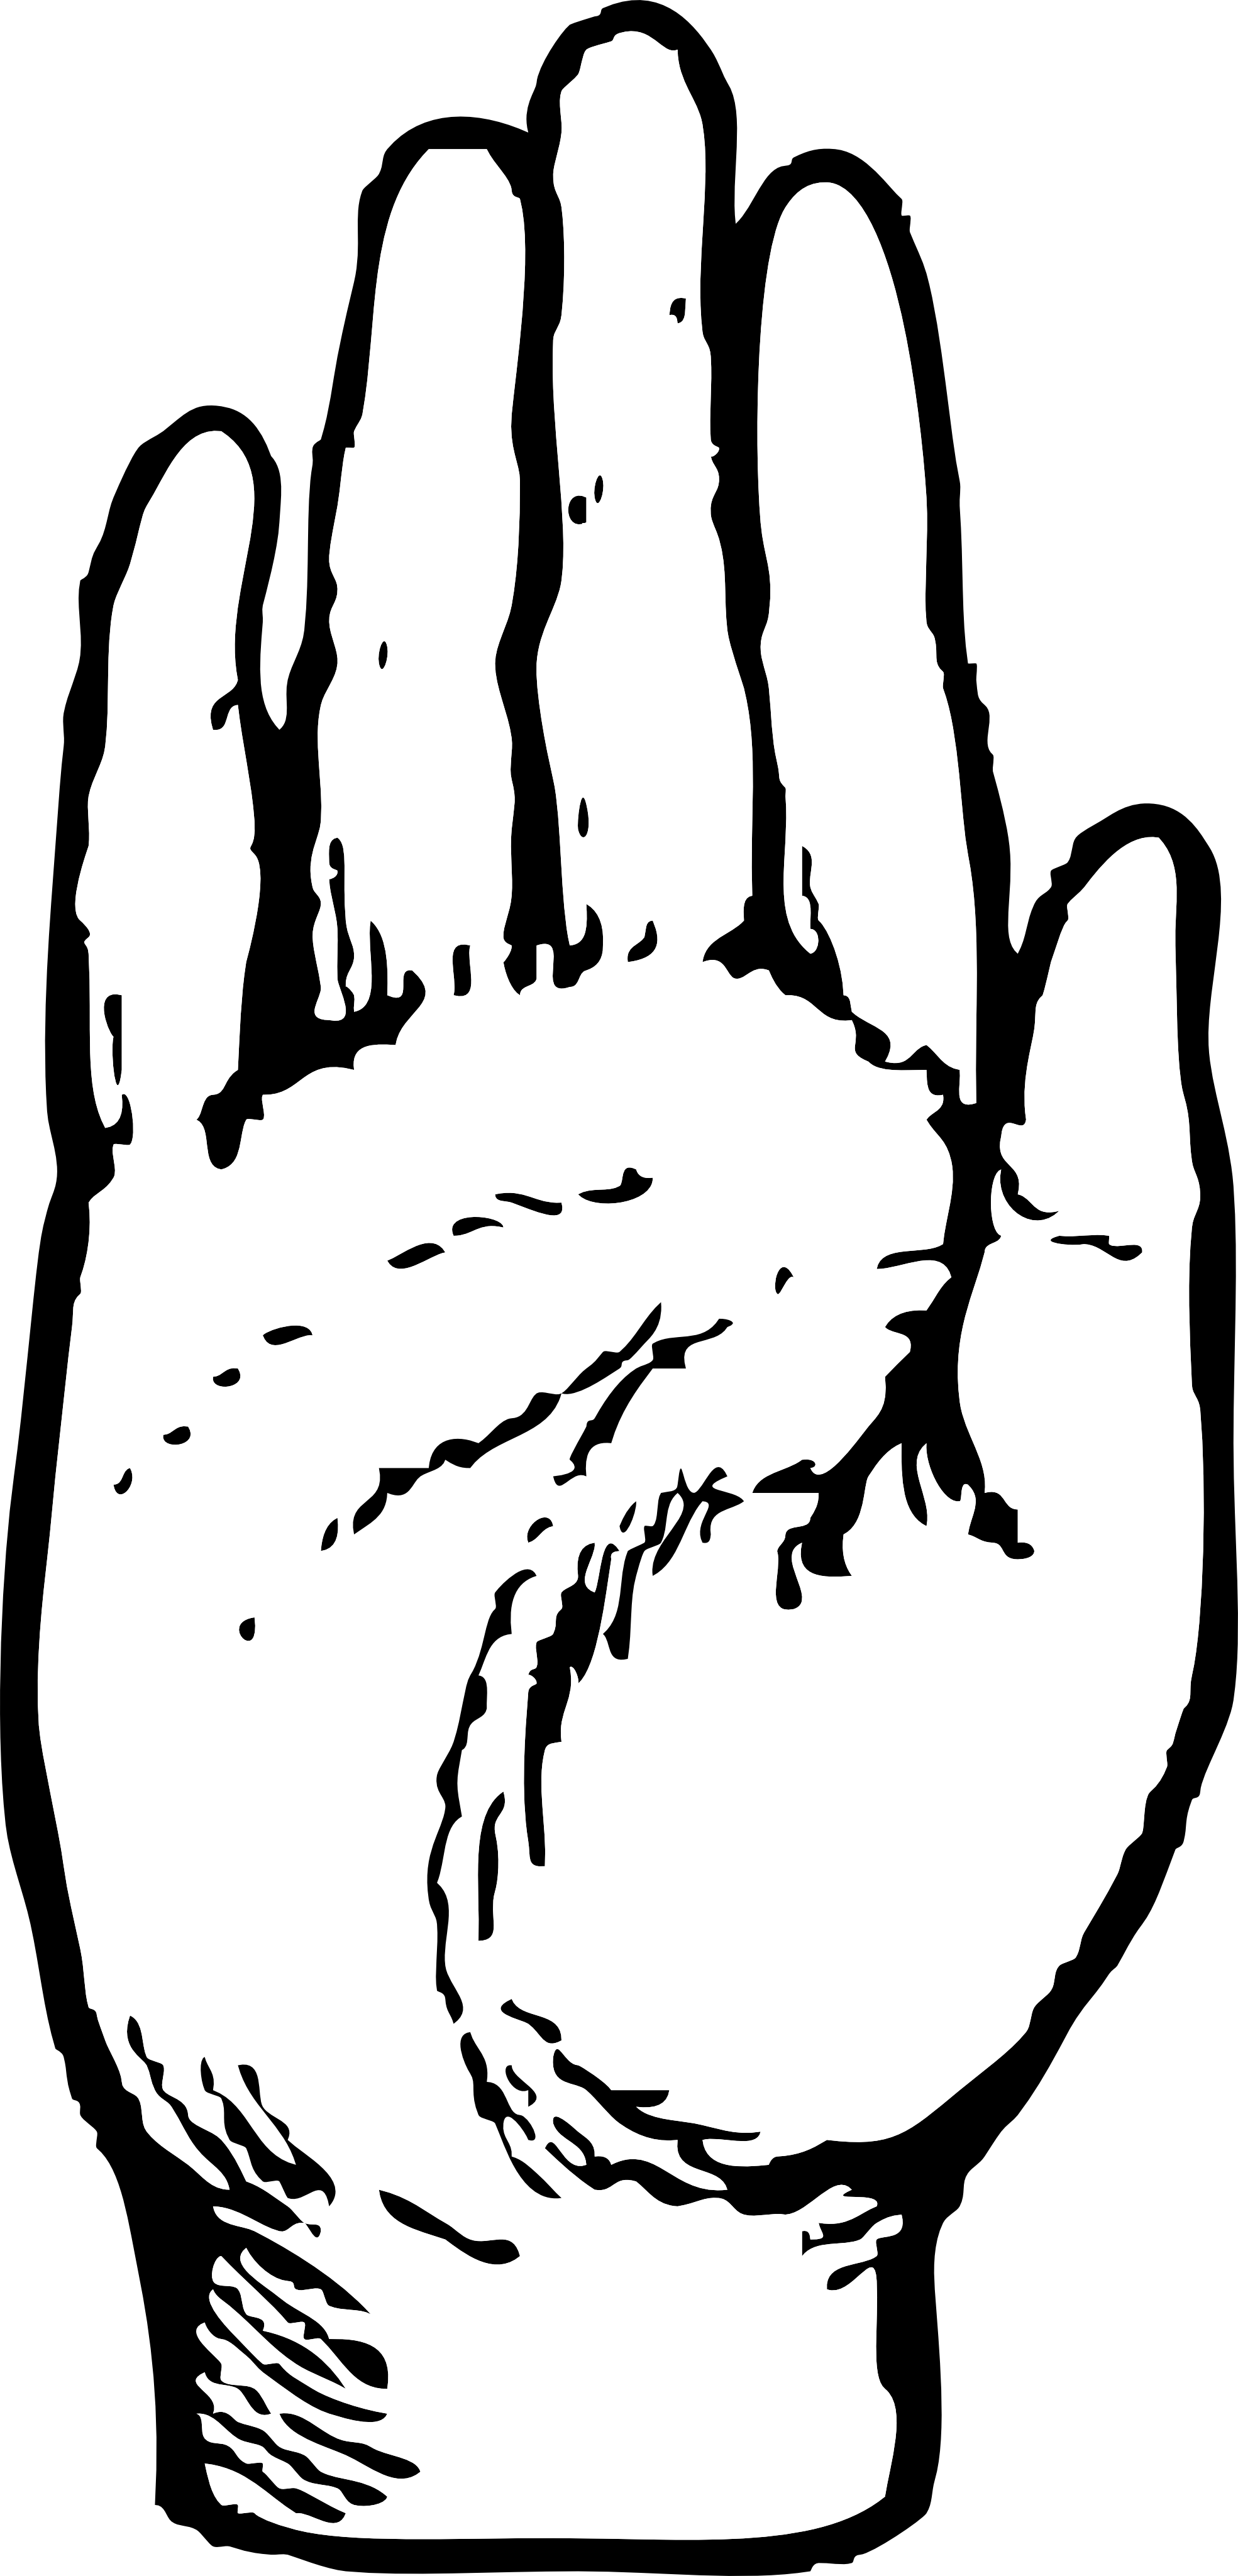 Hand Clipart Black And White | Clipart Panda - Free Clipart Images